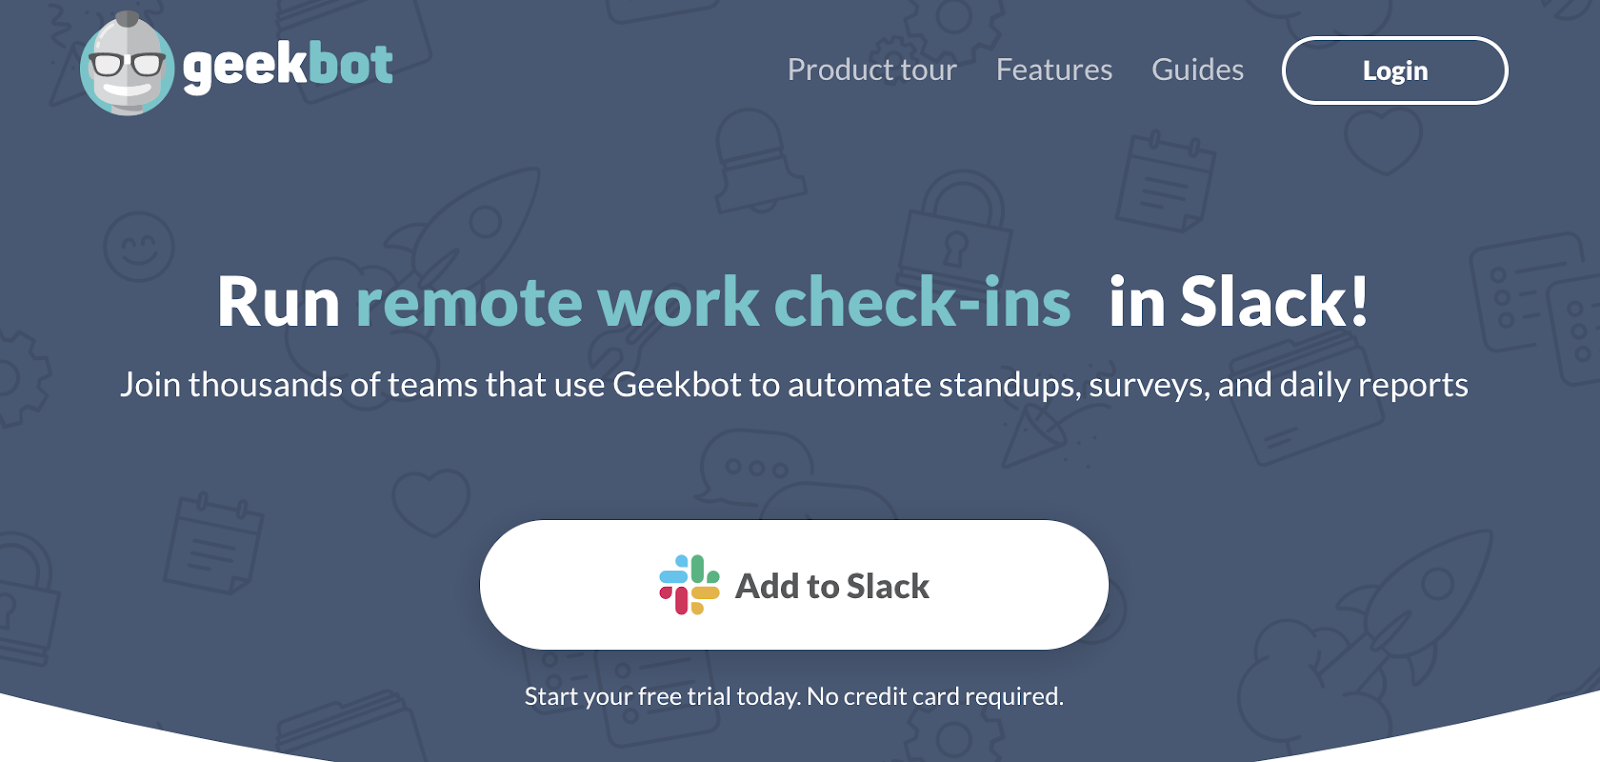 The Geekbot homepage: Run remote work check-ins in Slack!